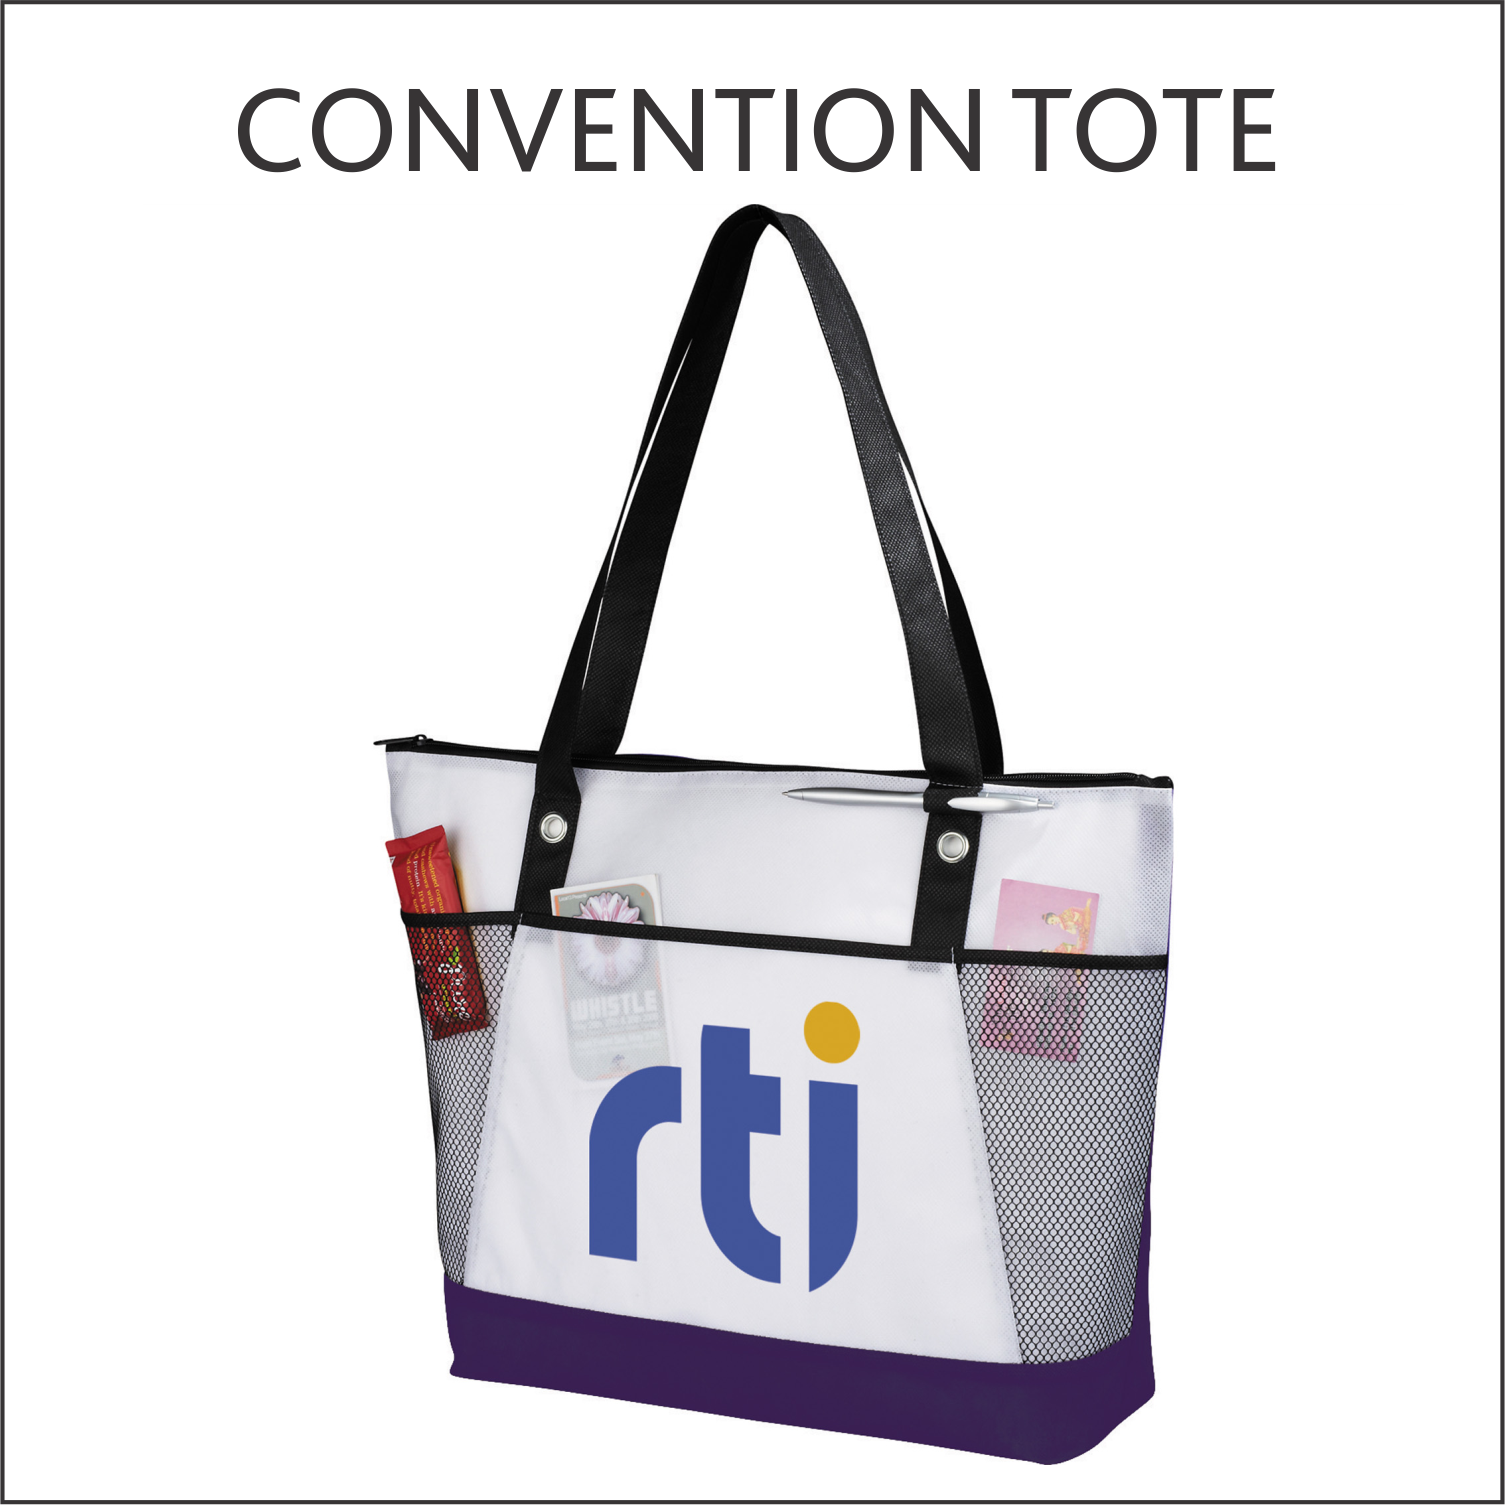 CONVENTION TOTE.png